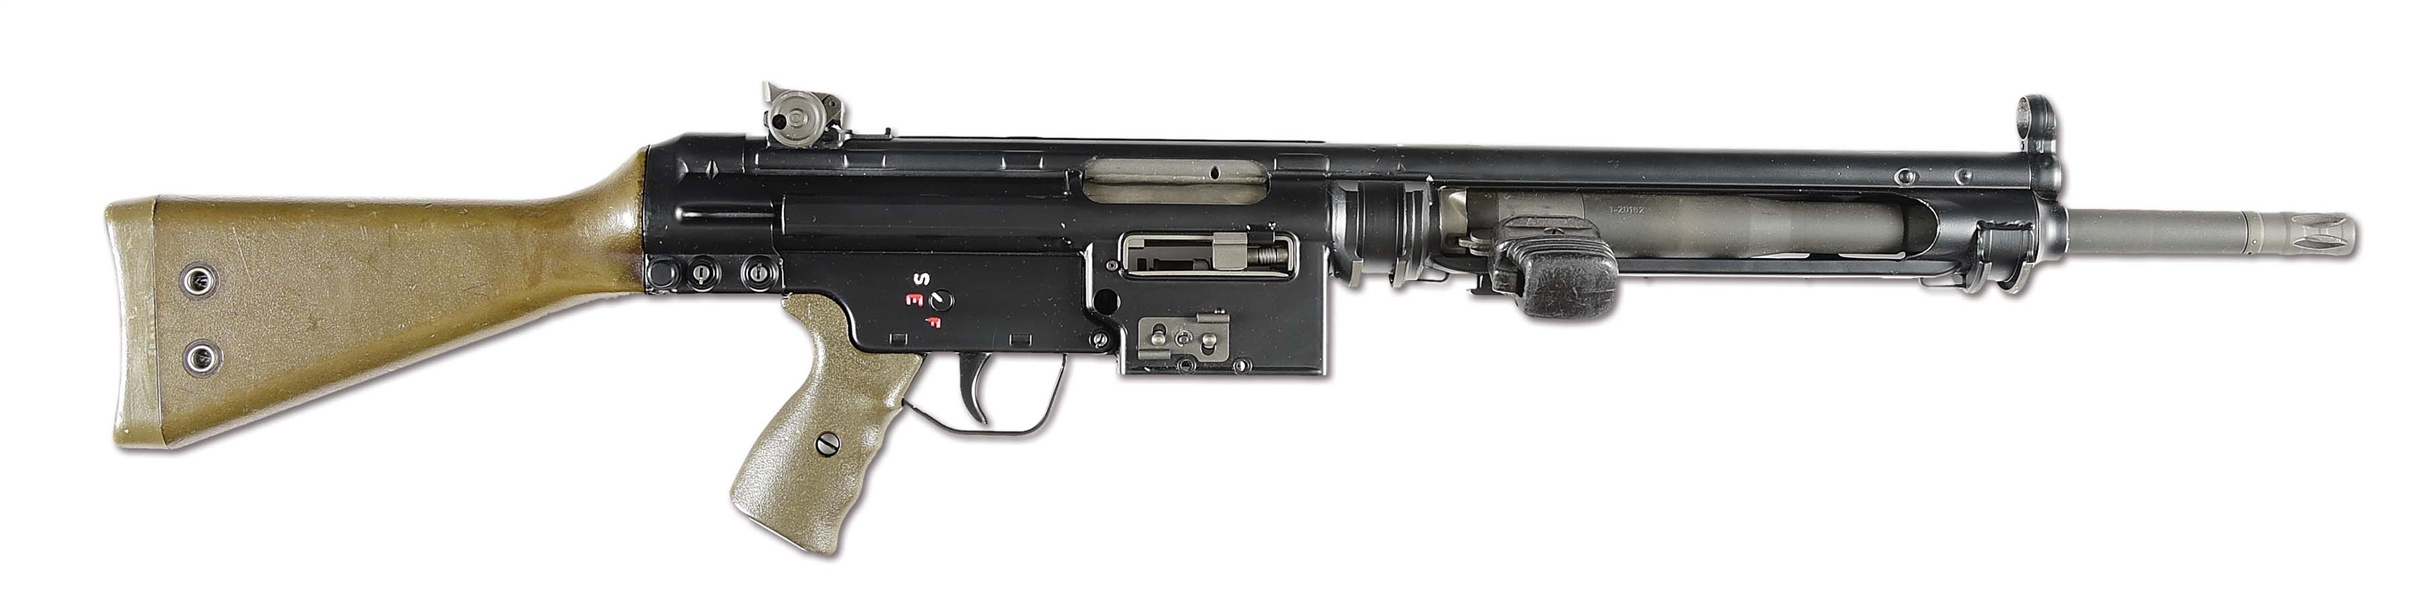 (N) NEAR MINT CONDITION DYER MANUFACTURED HECKLER AND KOCH HK21 BELT FED MACHINE GUN (FULLY TRANSFERABLE).